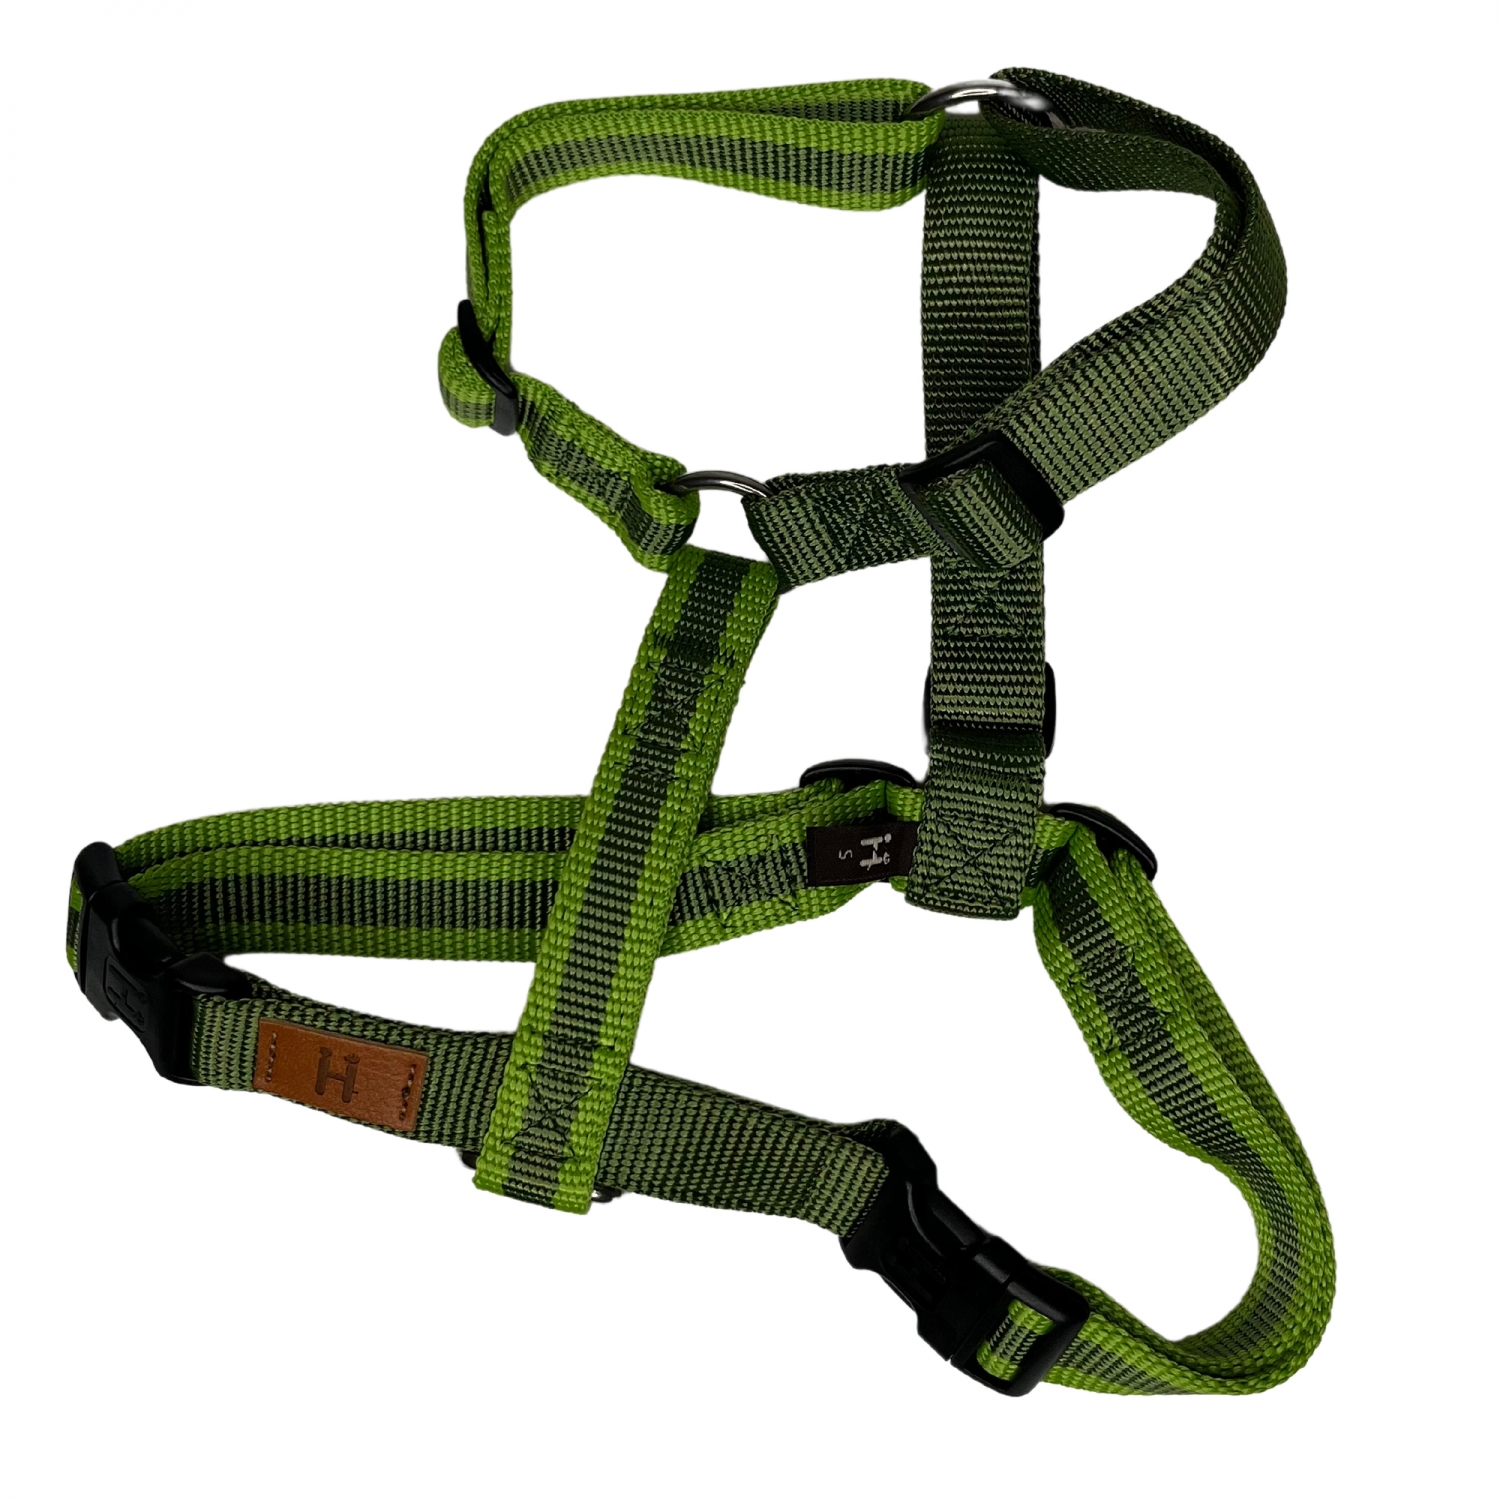 Early Spring Harness - limited edition